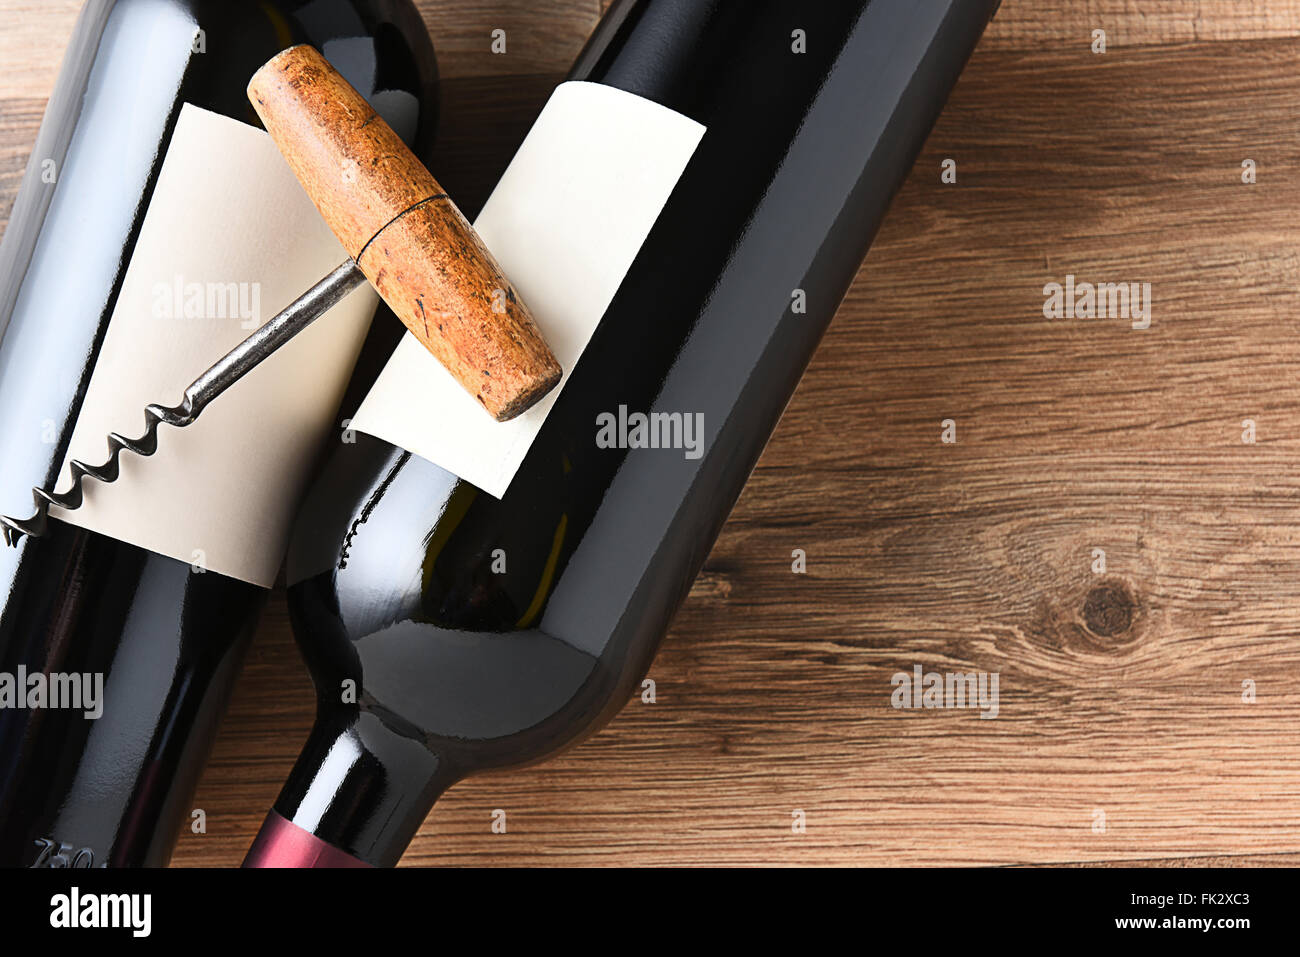 Top view of wine bottles and corkscrew with copy space. Stock Photo